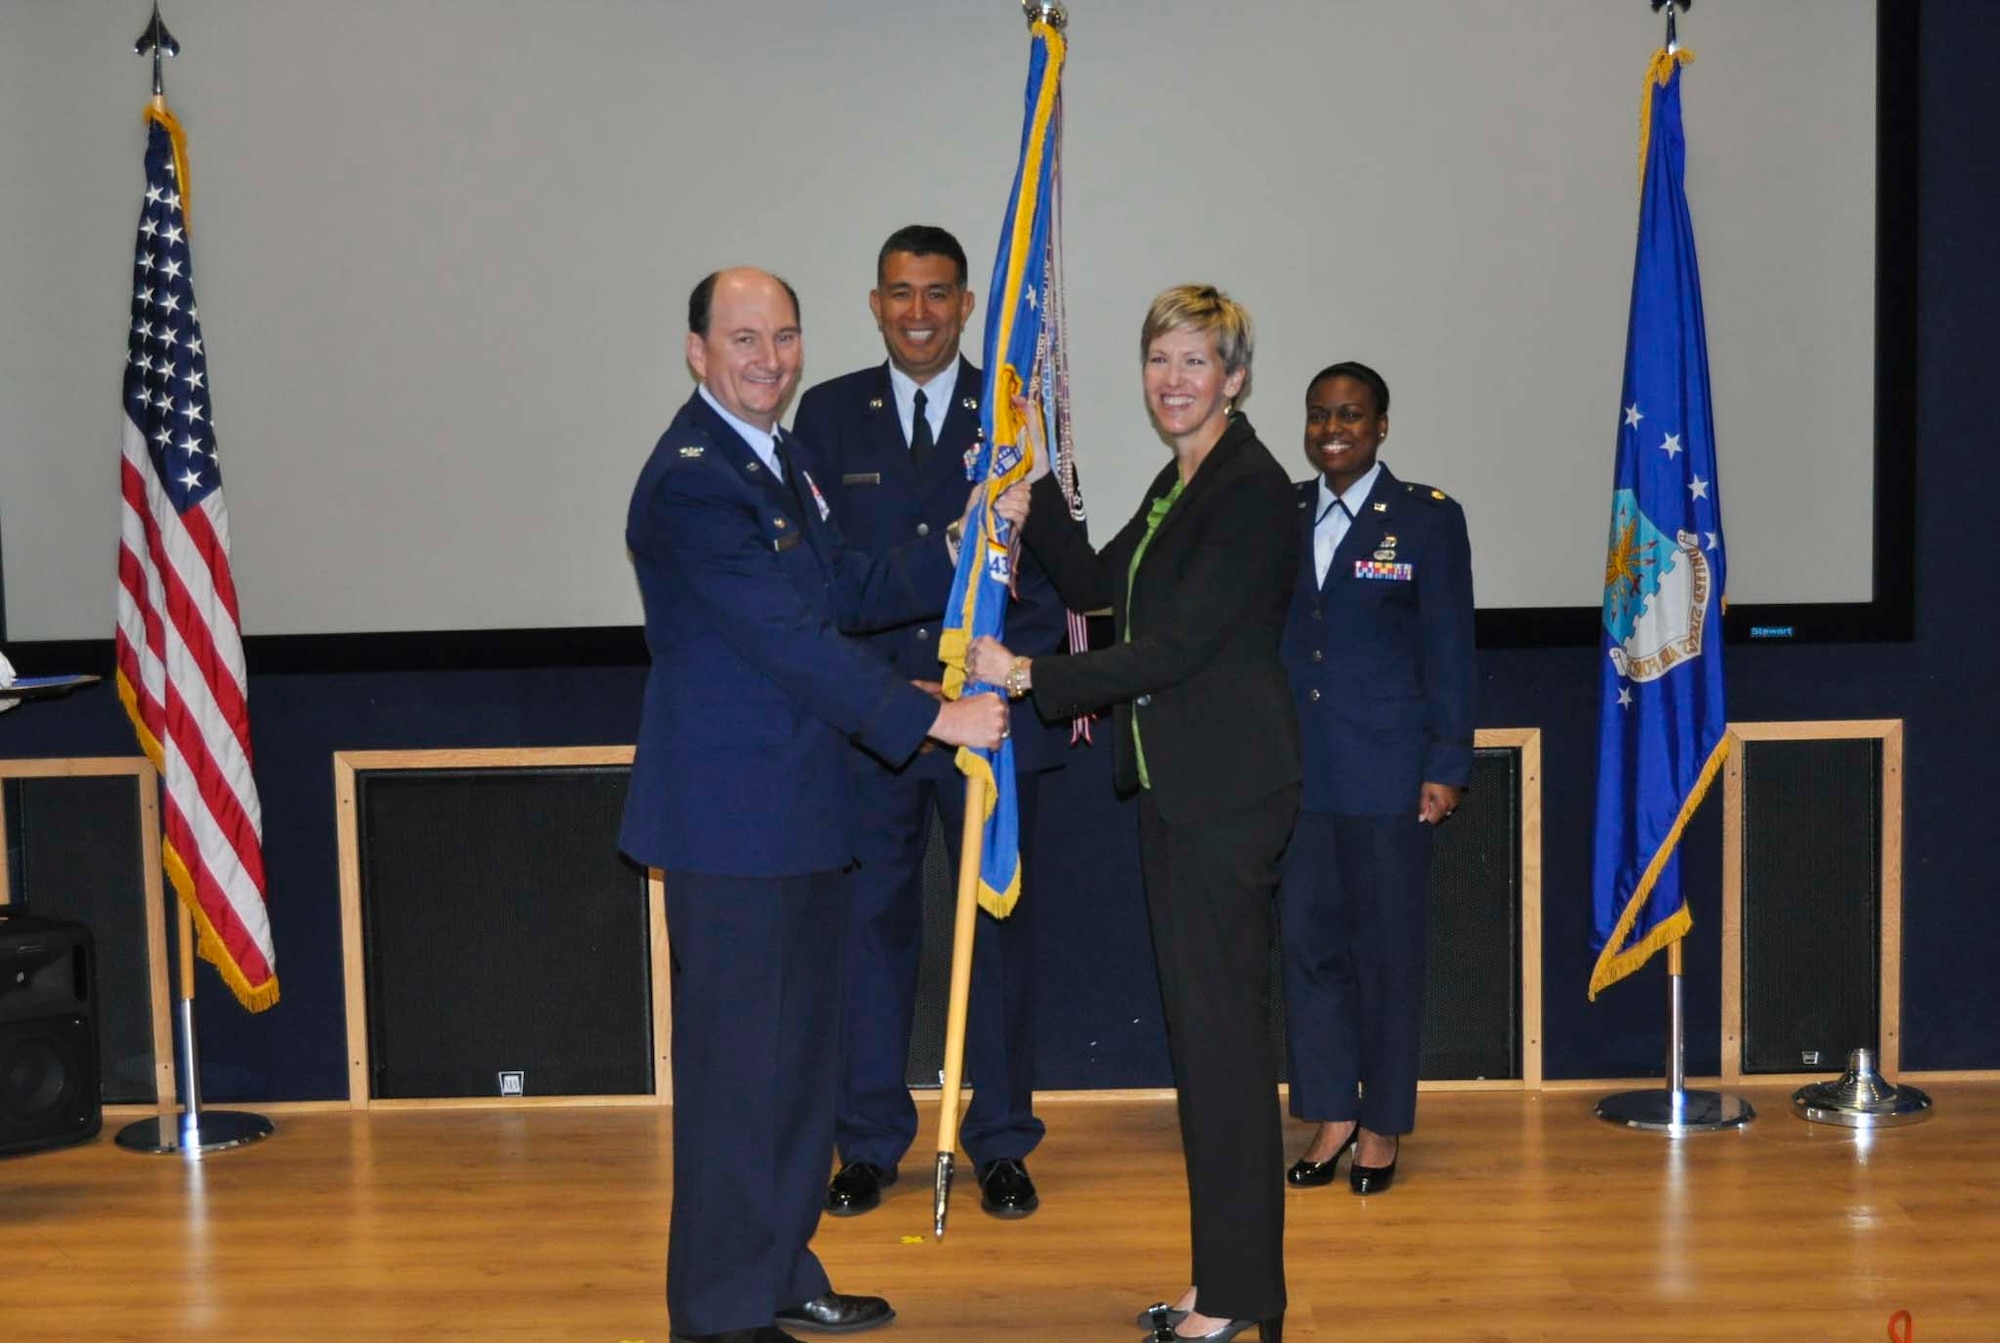 Kelly Lerch accepts the 433rd Airlift Wing guidon from Col. Thomas K. Smith, Jr., 433rd AW commander, during the Honorary Commanders Induction Ceremony held at Joint Base San Antonio-Lackland April 30, 2016. Lerch is the group talent acquisition manager for Enterprise Holdings of South Texas and will be serving as the 433rd Force Support Squadron Honorary Commander.  (U.S. Air Force photo/Senior Airman Bryan Swink)